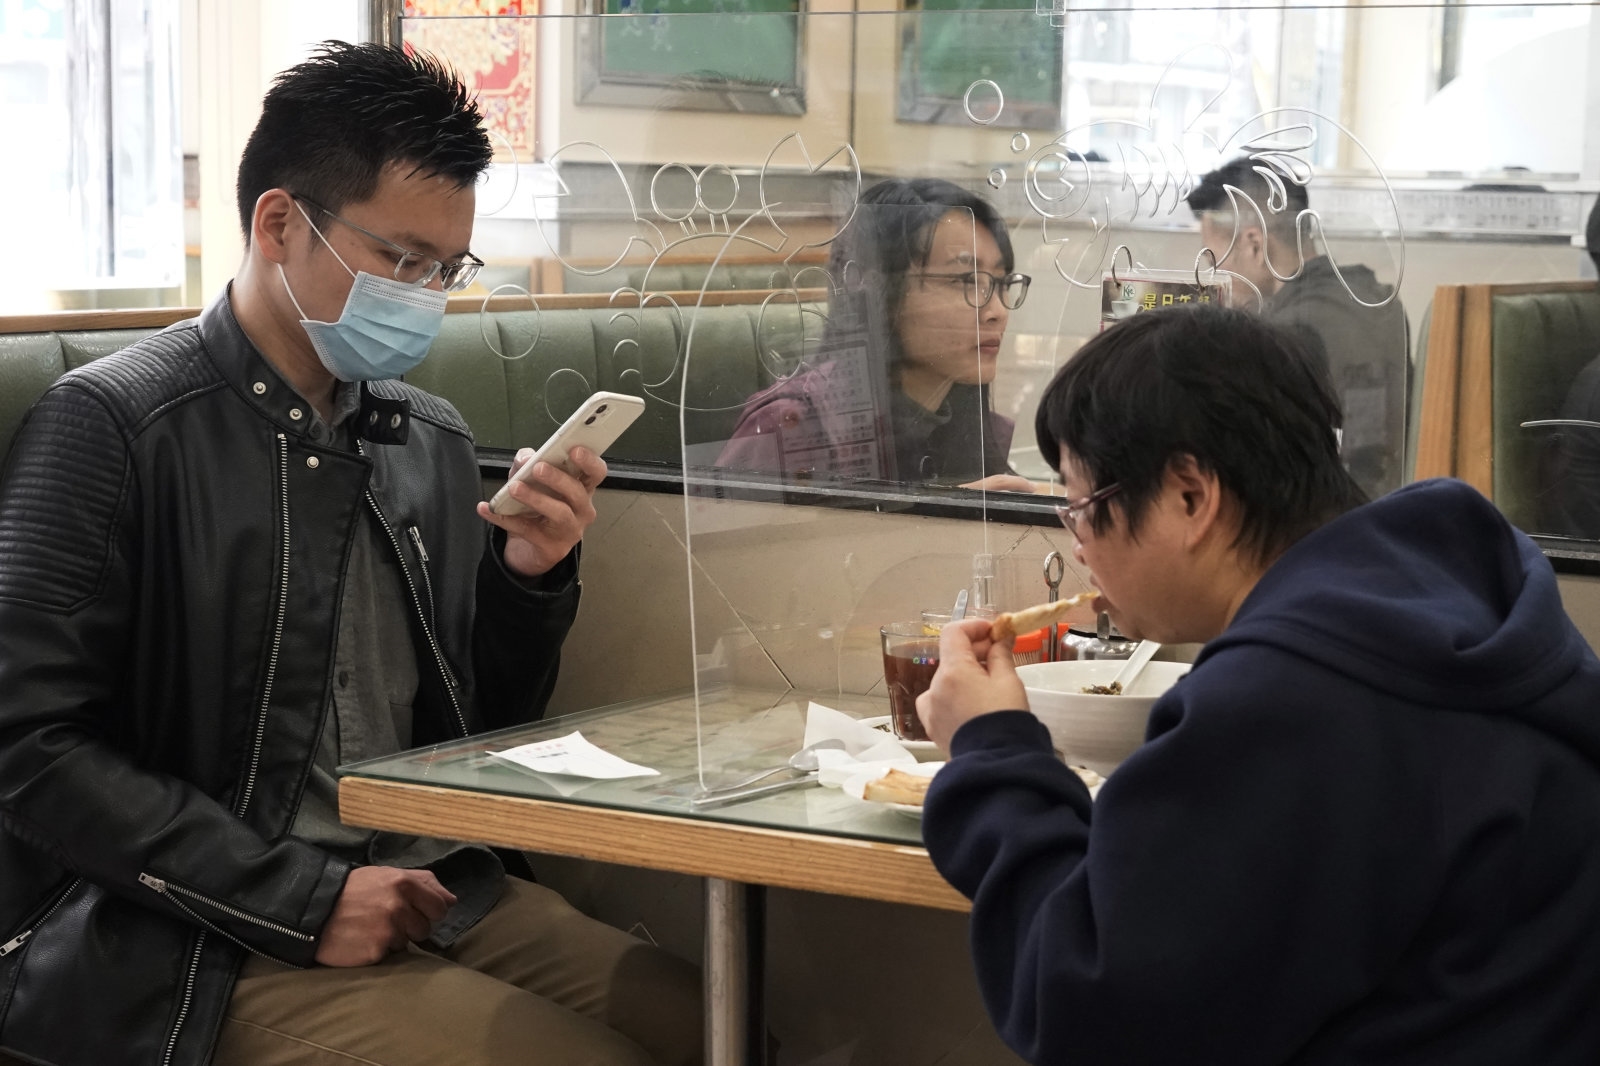 China rolls out 'close contact detection app' for coronavirus | DeviceDaily.com